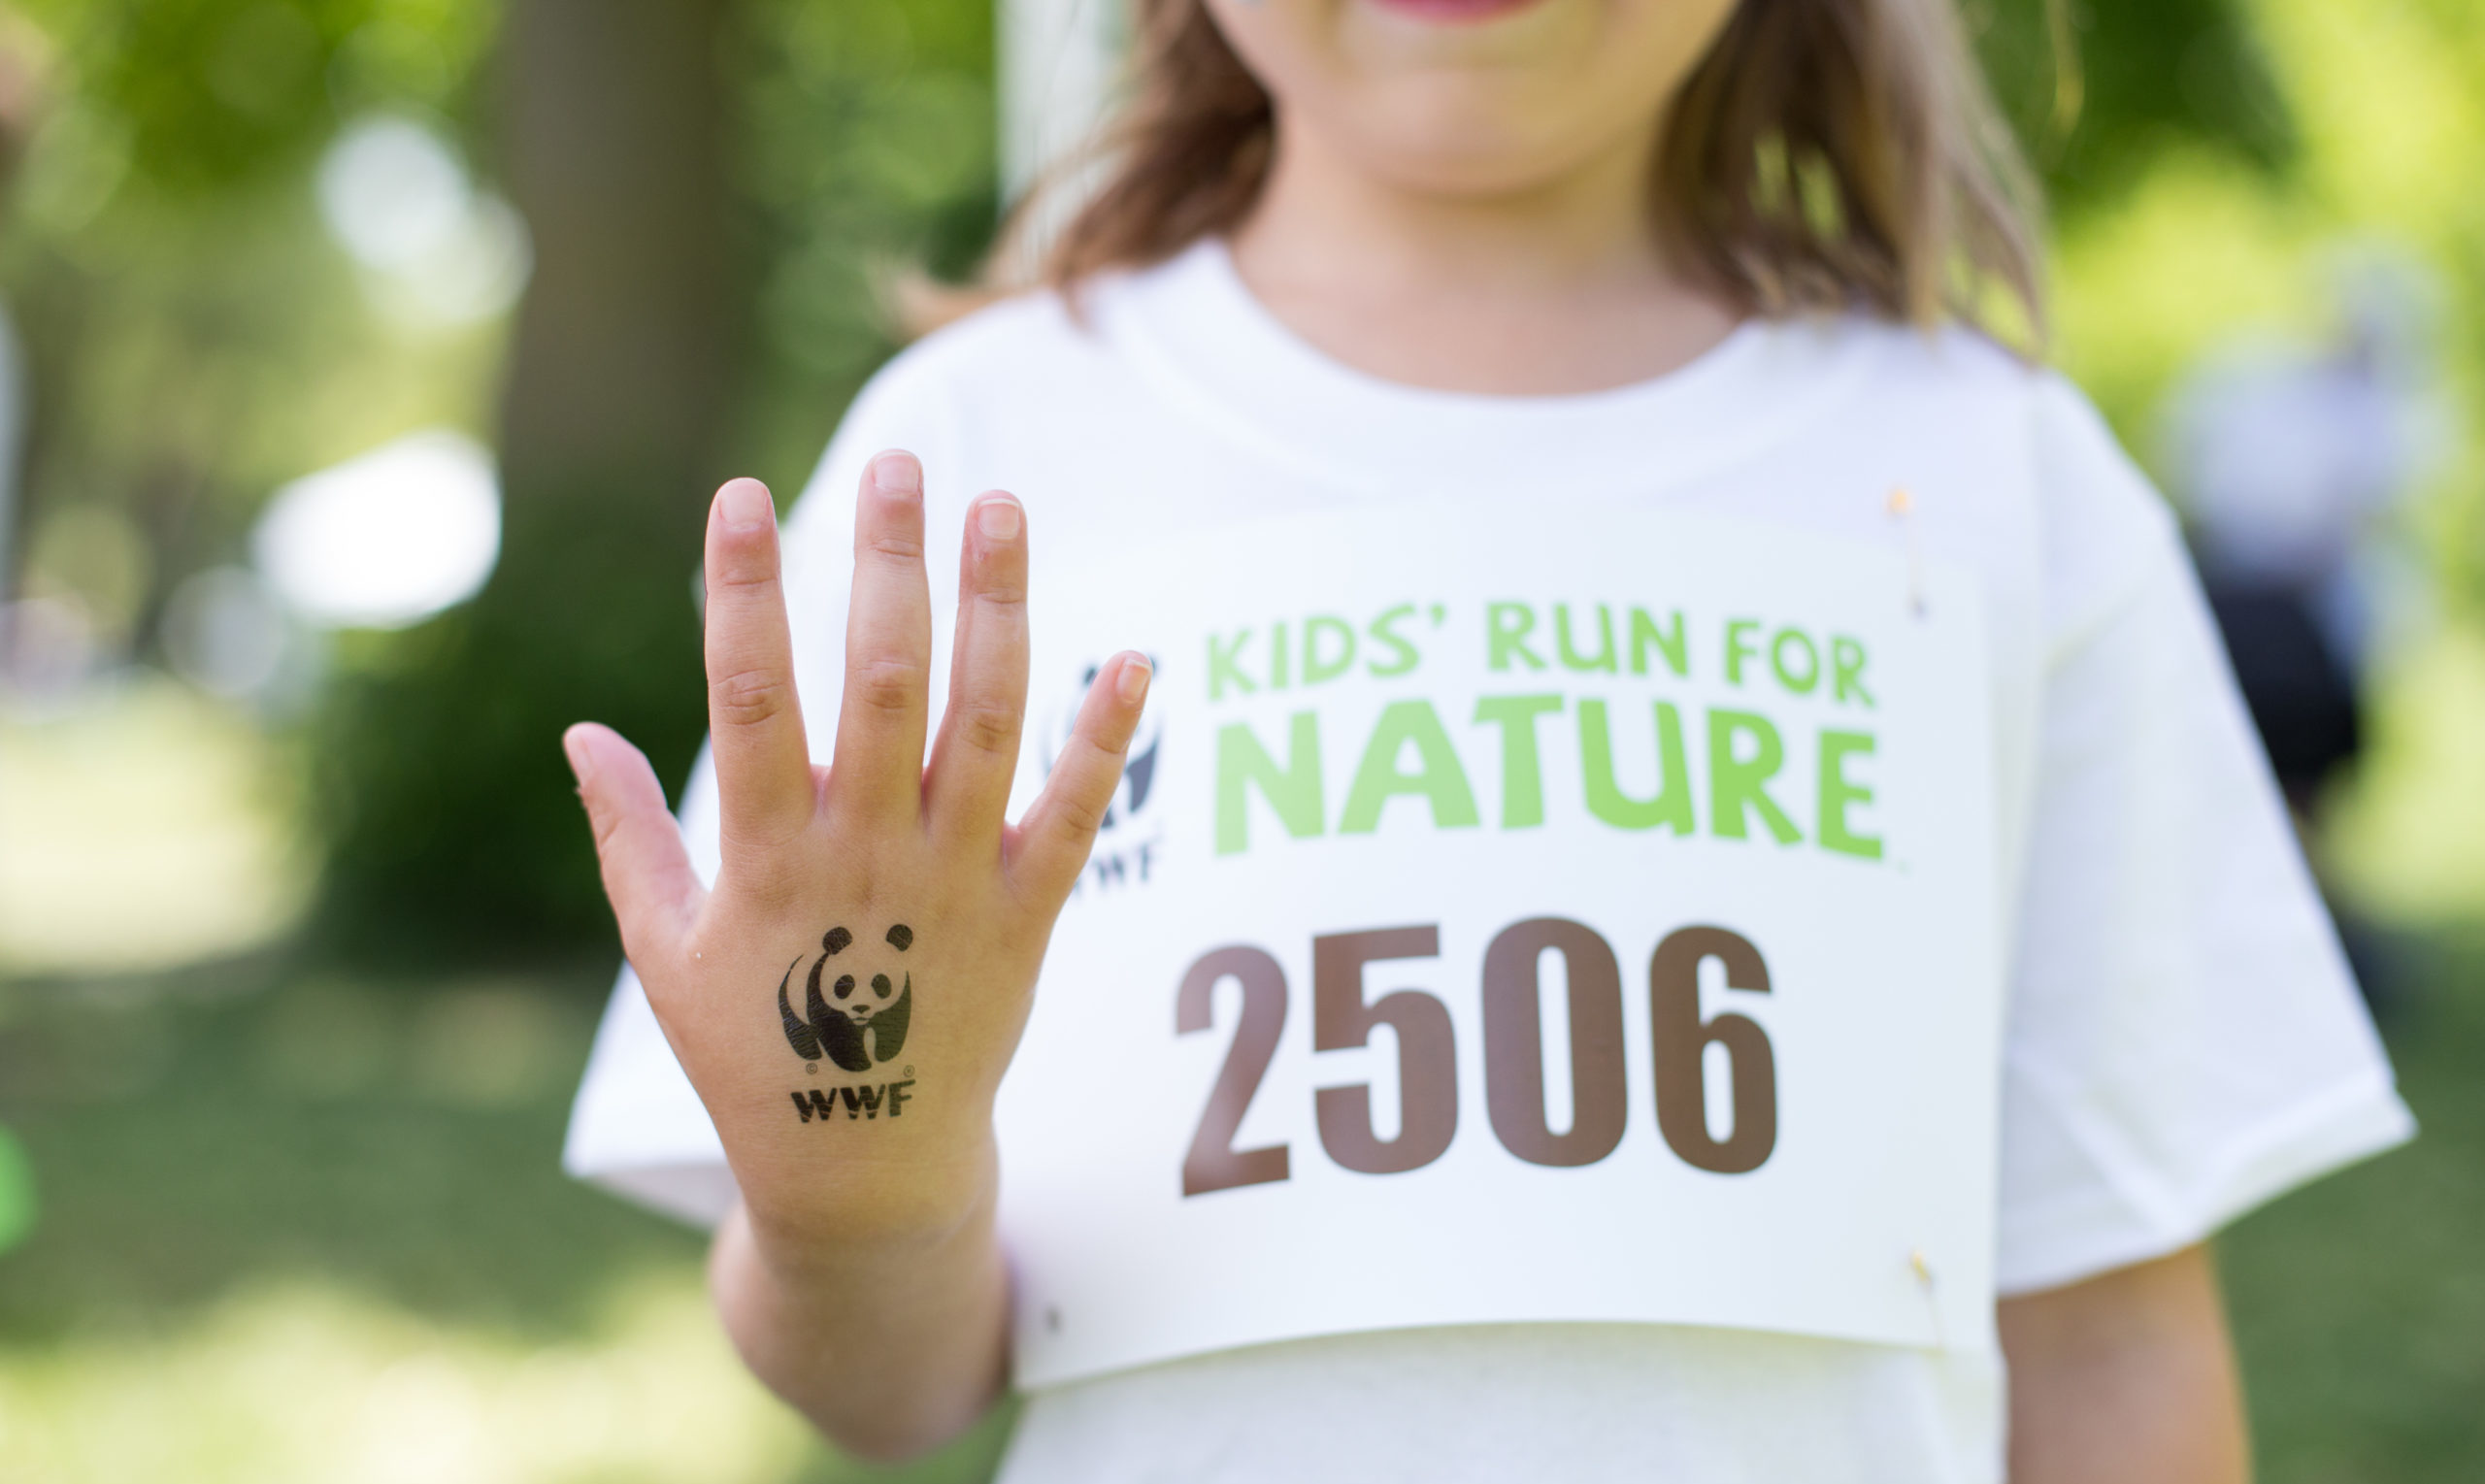 Kids' Run for Nature participant